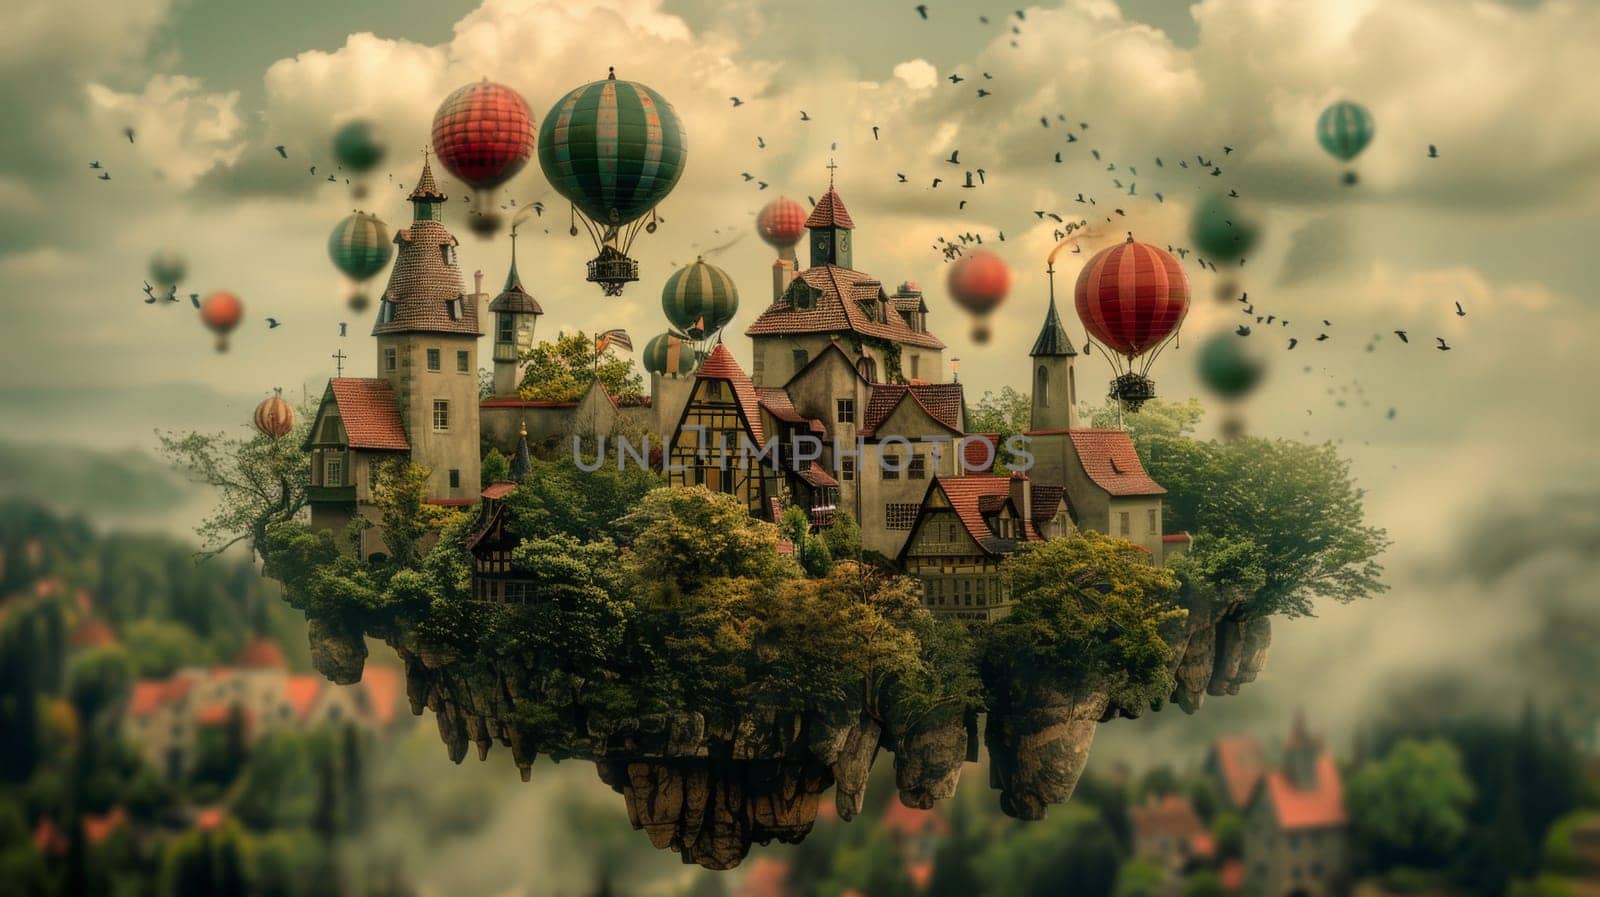 A small village with many hot air balloons floating in the sky